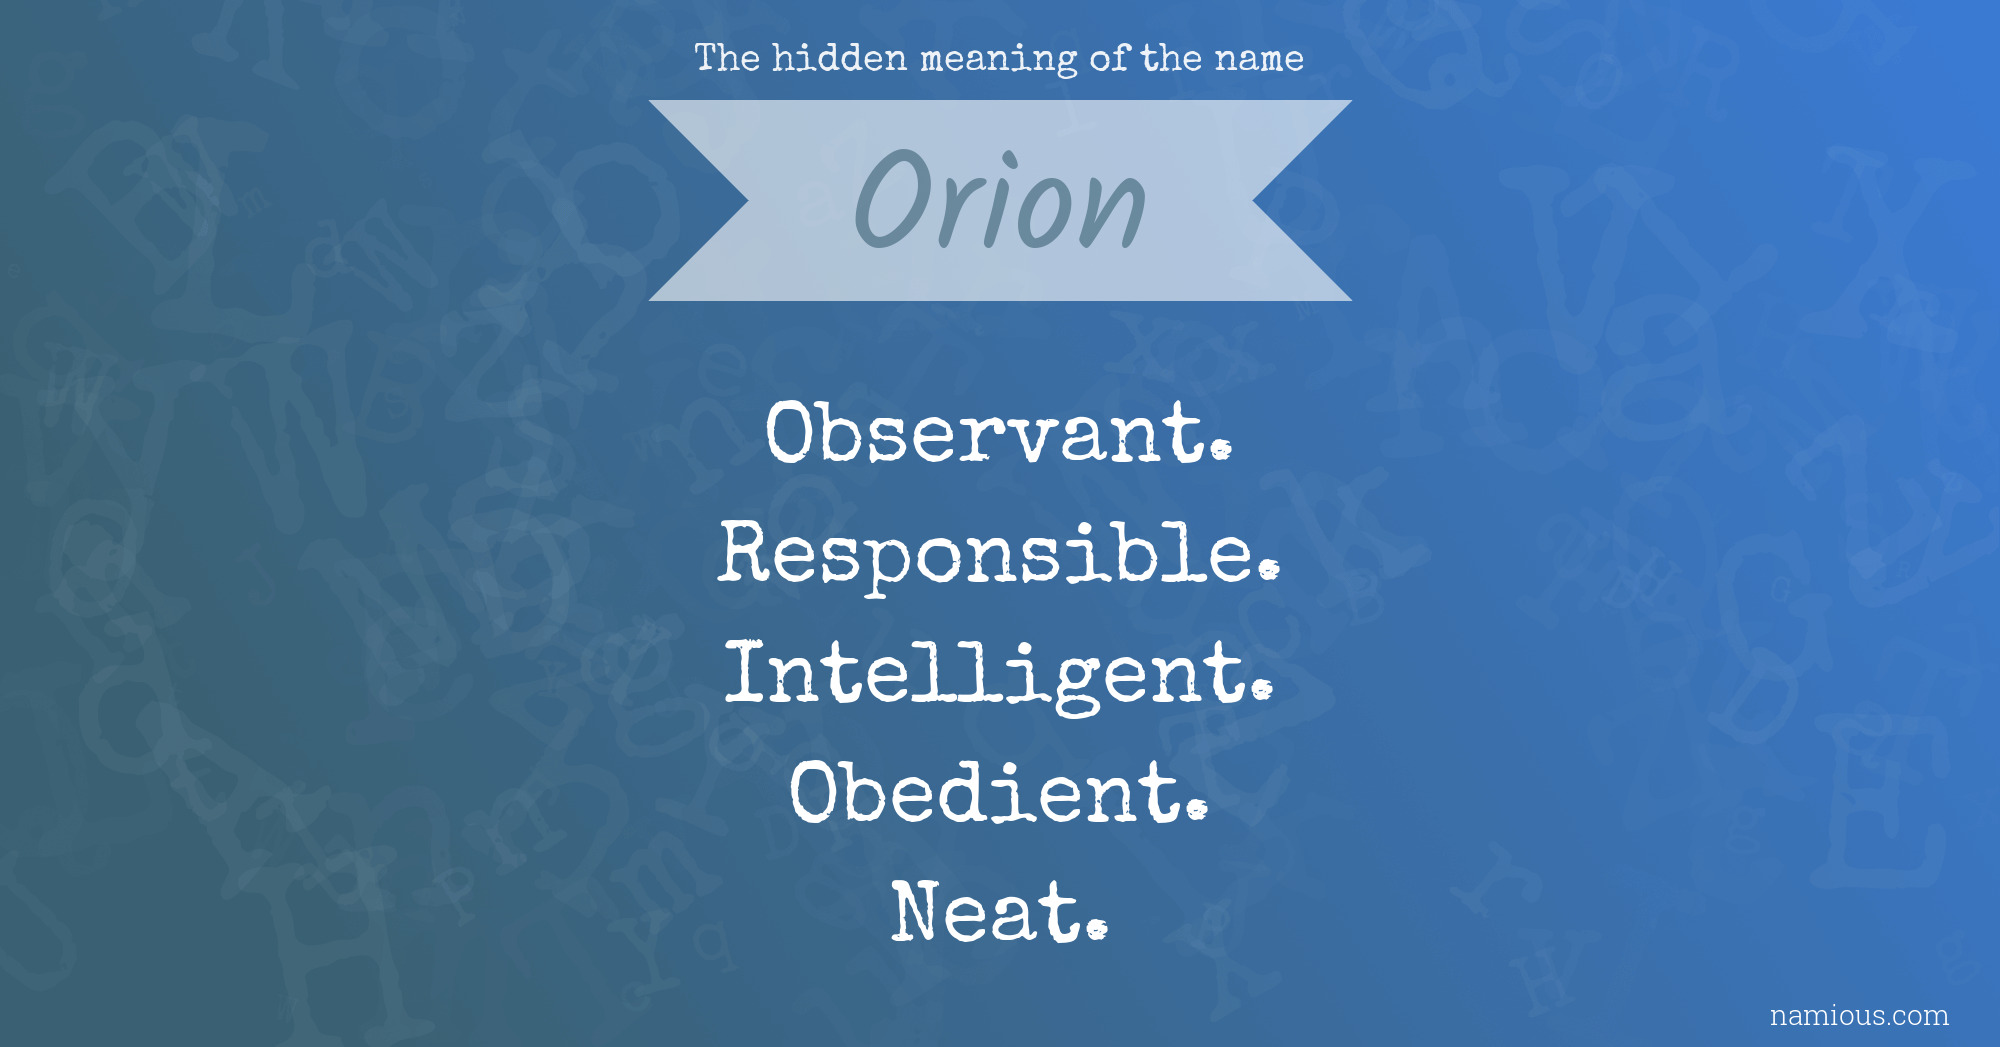 The hidden meaning of the name Orion